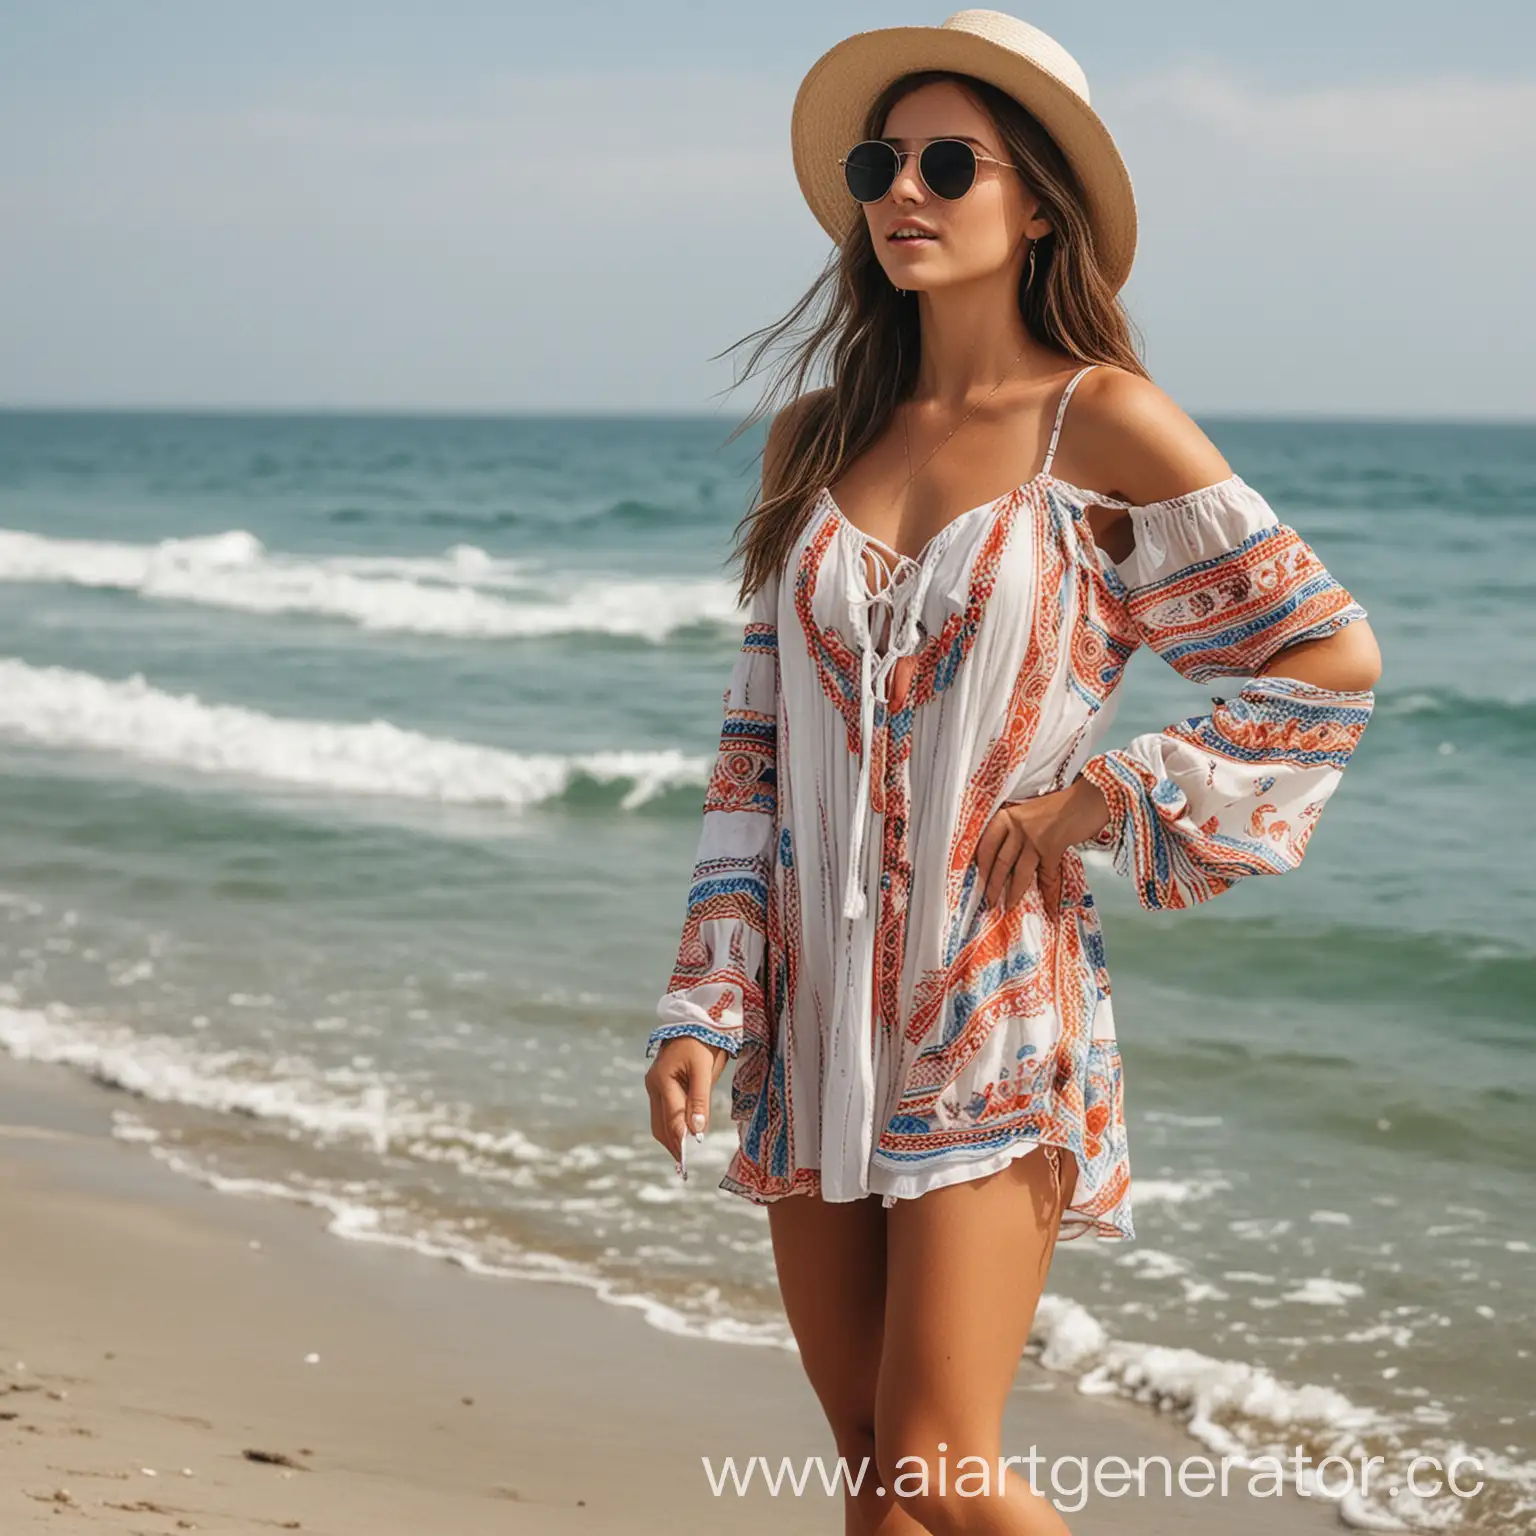 Embracing the latest trends in beach fashion can elevate your summer style.